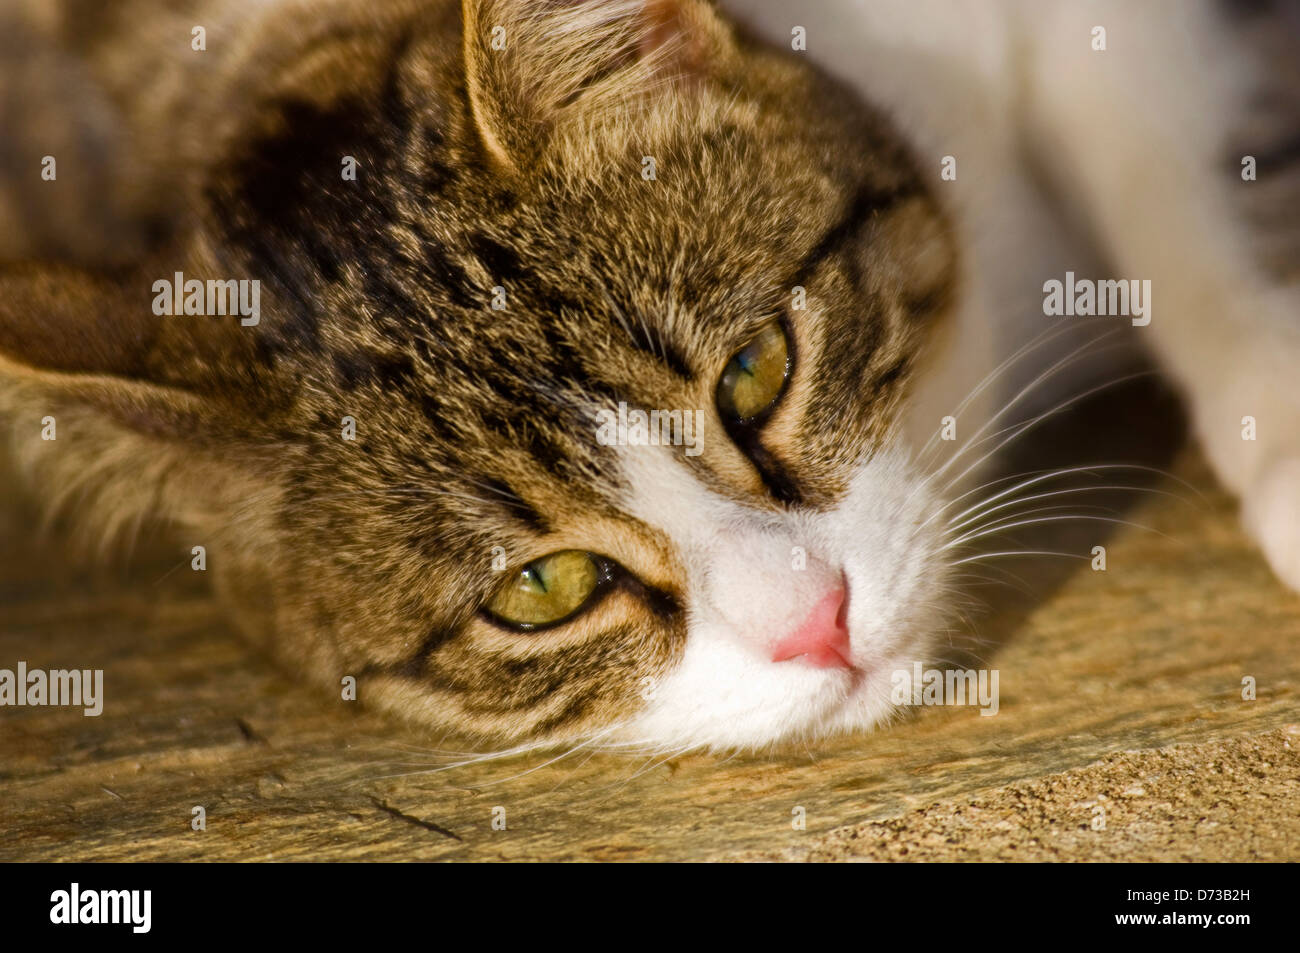 Young cat lying on the floor looking at camera Stock Photo